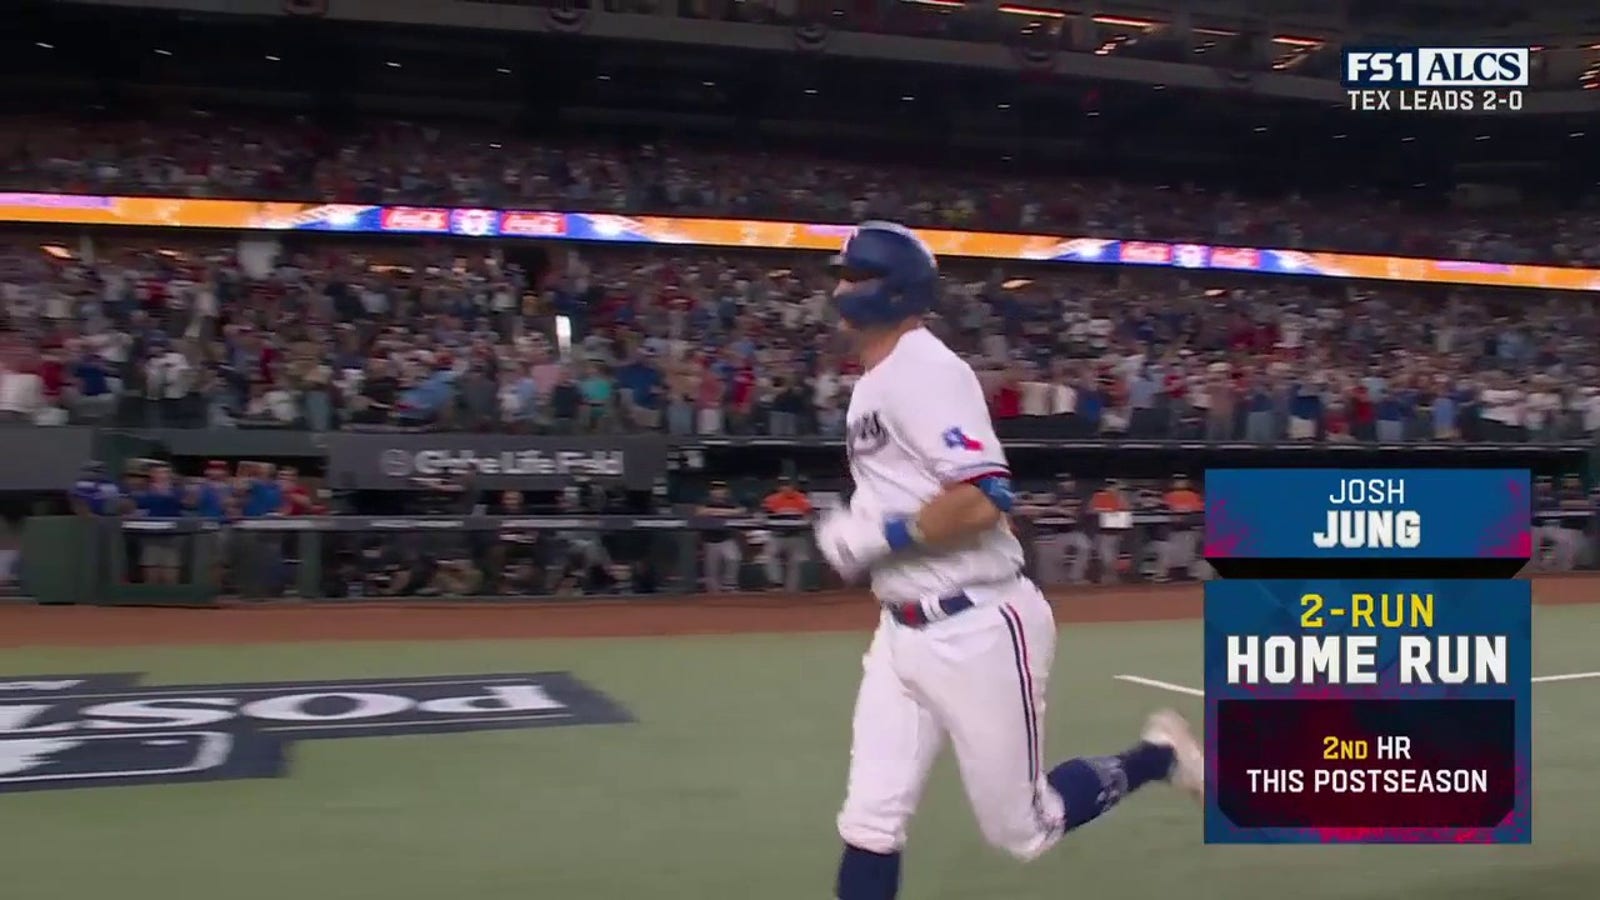 Mad Max returns for Rangers to put them up 3-0 over Astros in ALCS